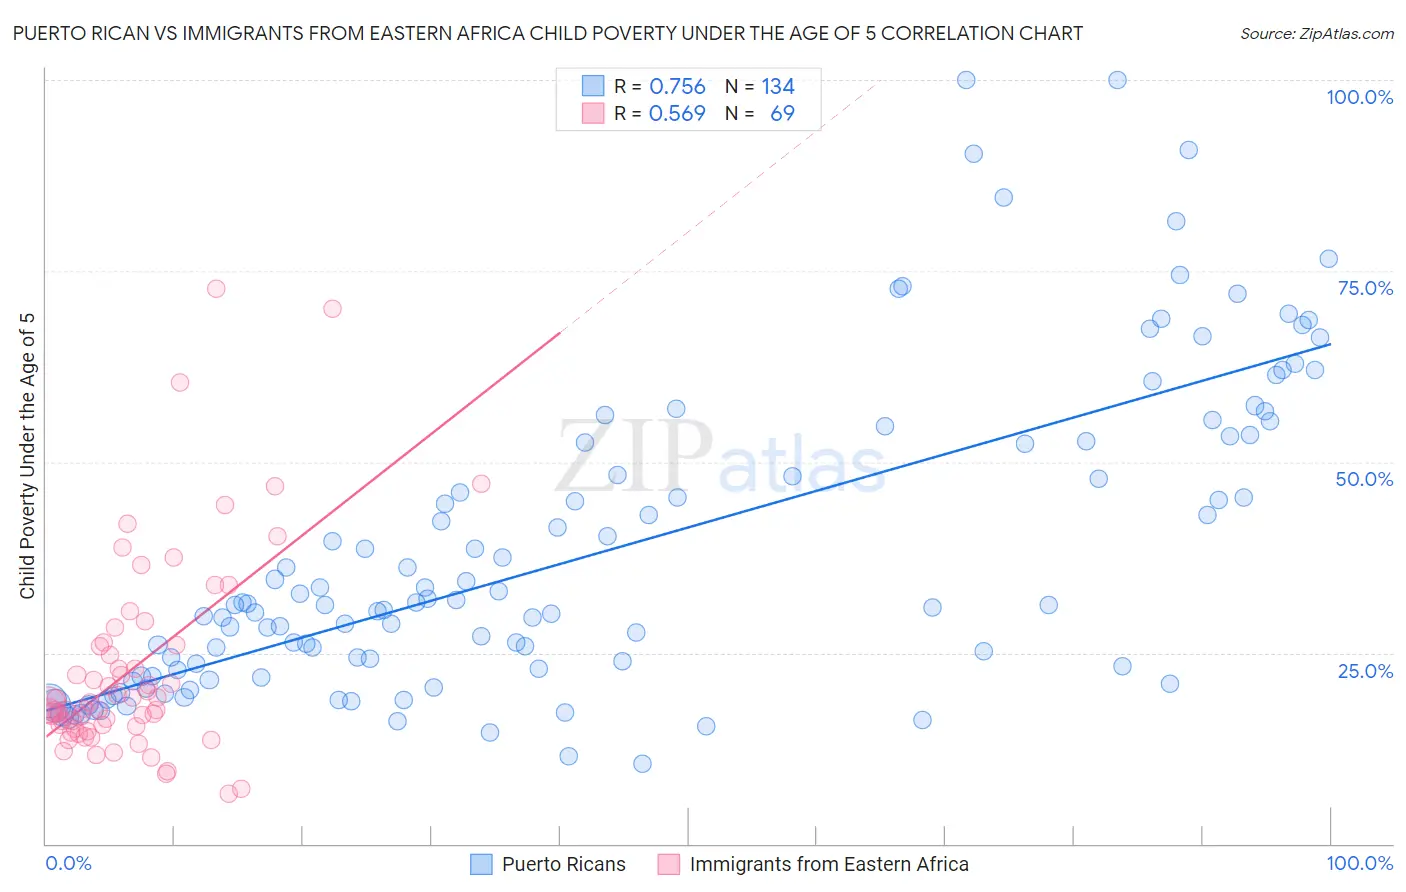 Puerto Rican vs Immigrants from Eastern Africa Child Poverty Under the Age of 5